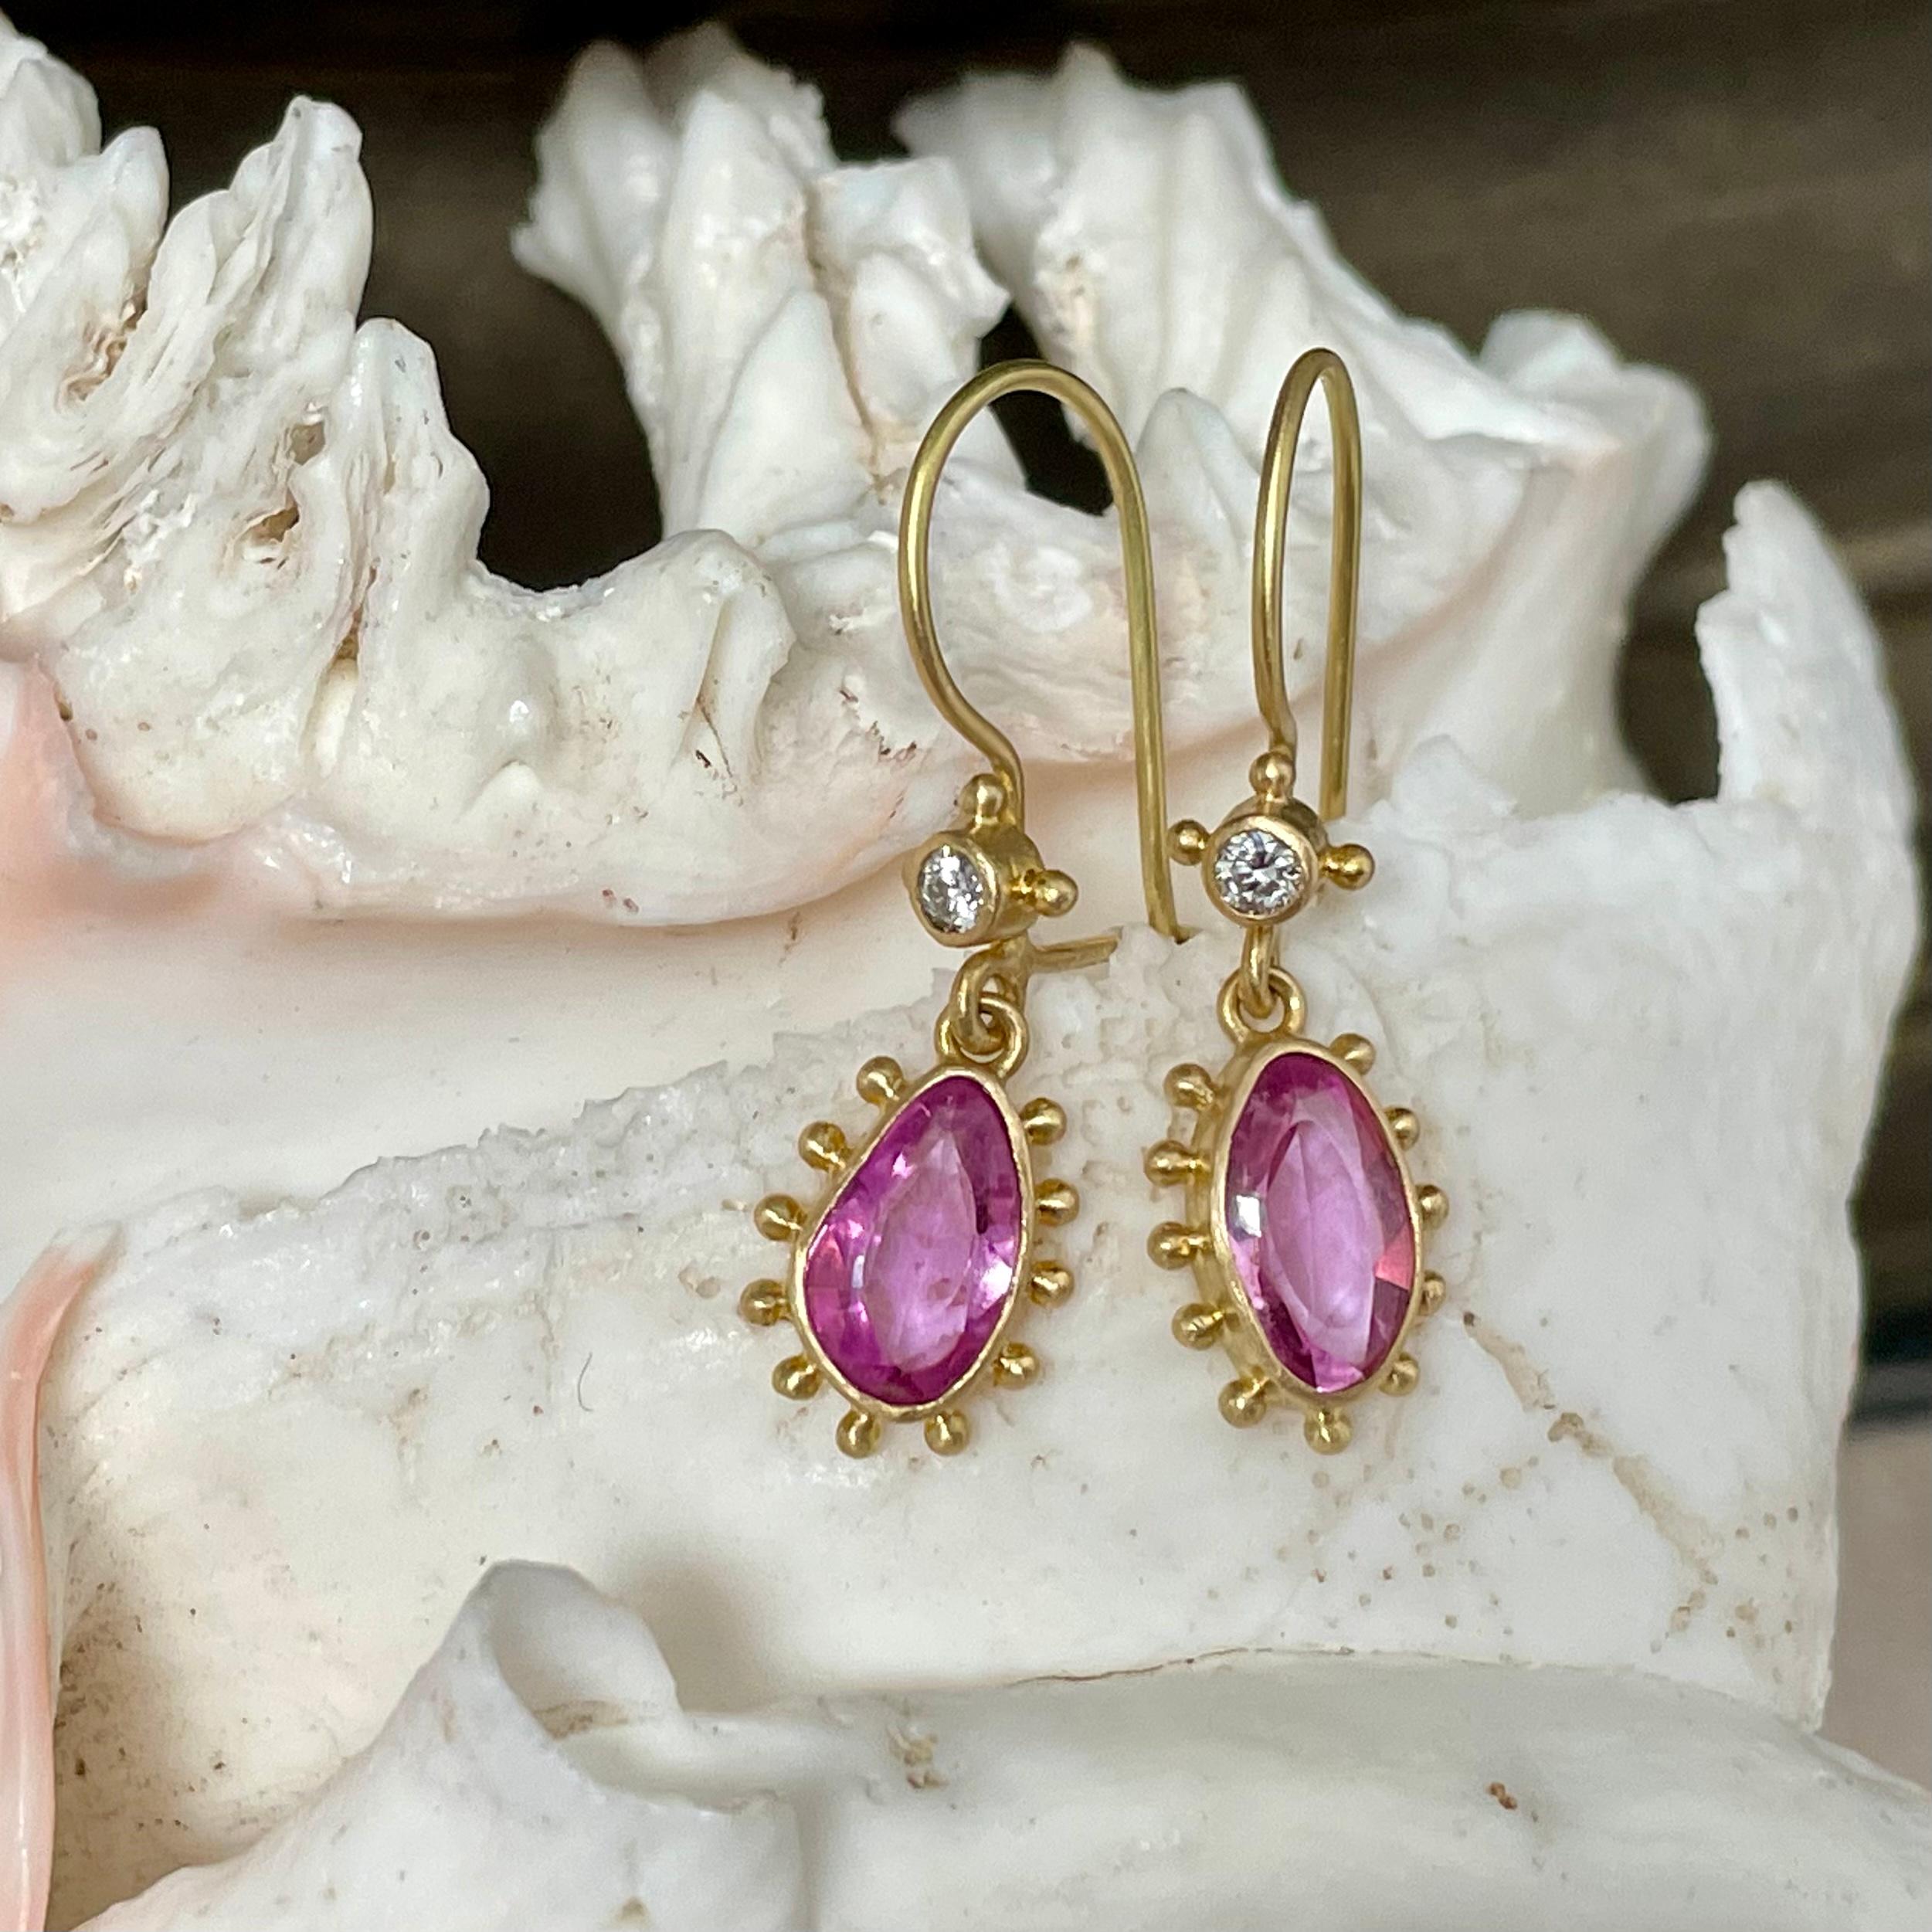 Two approximately 7 x 9 mm Irregular buff-top faceted pink sapphires are set in simple 18K bezels with separated 